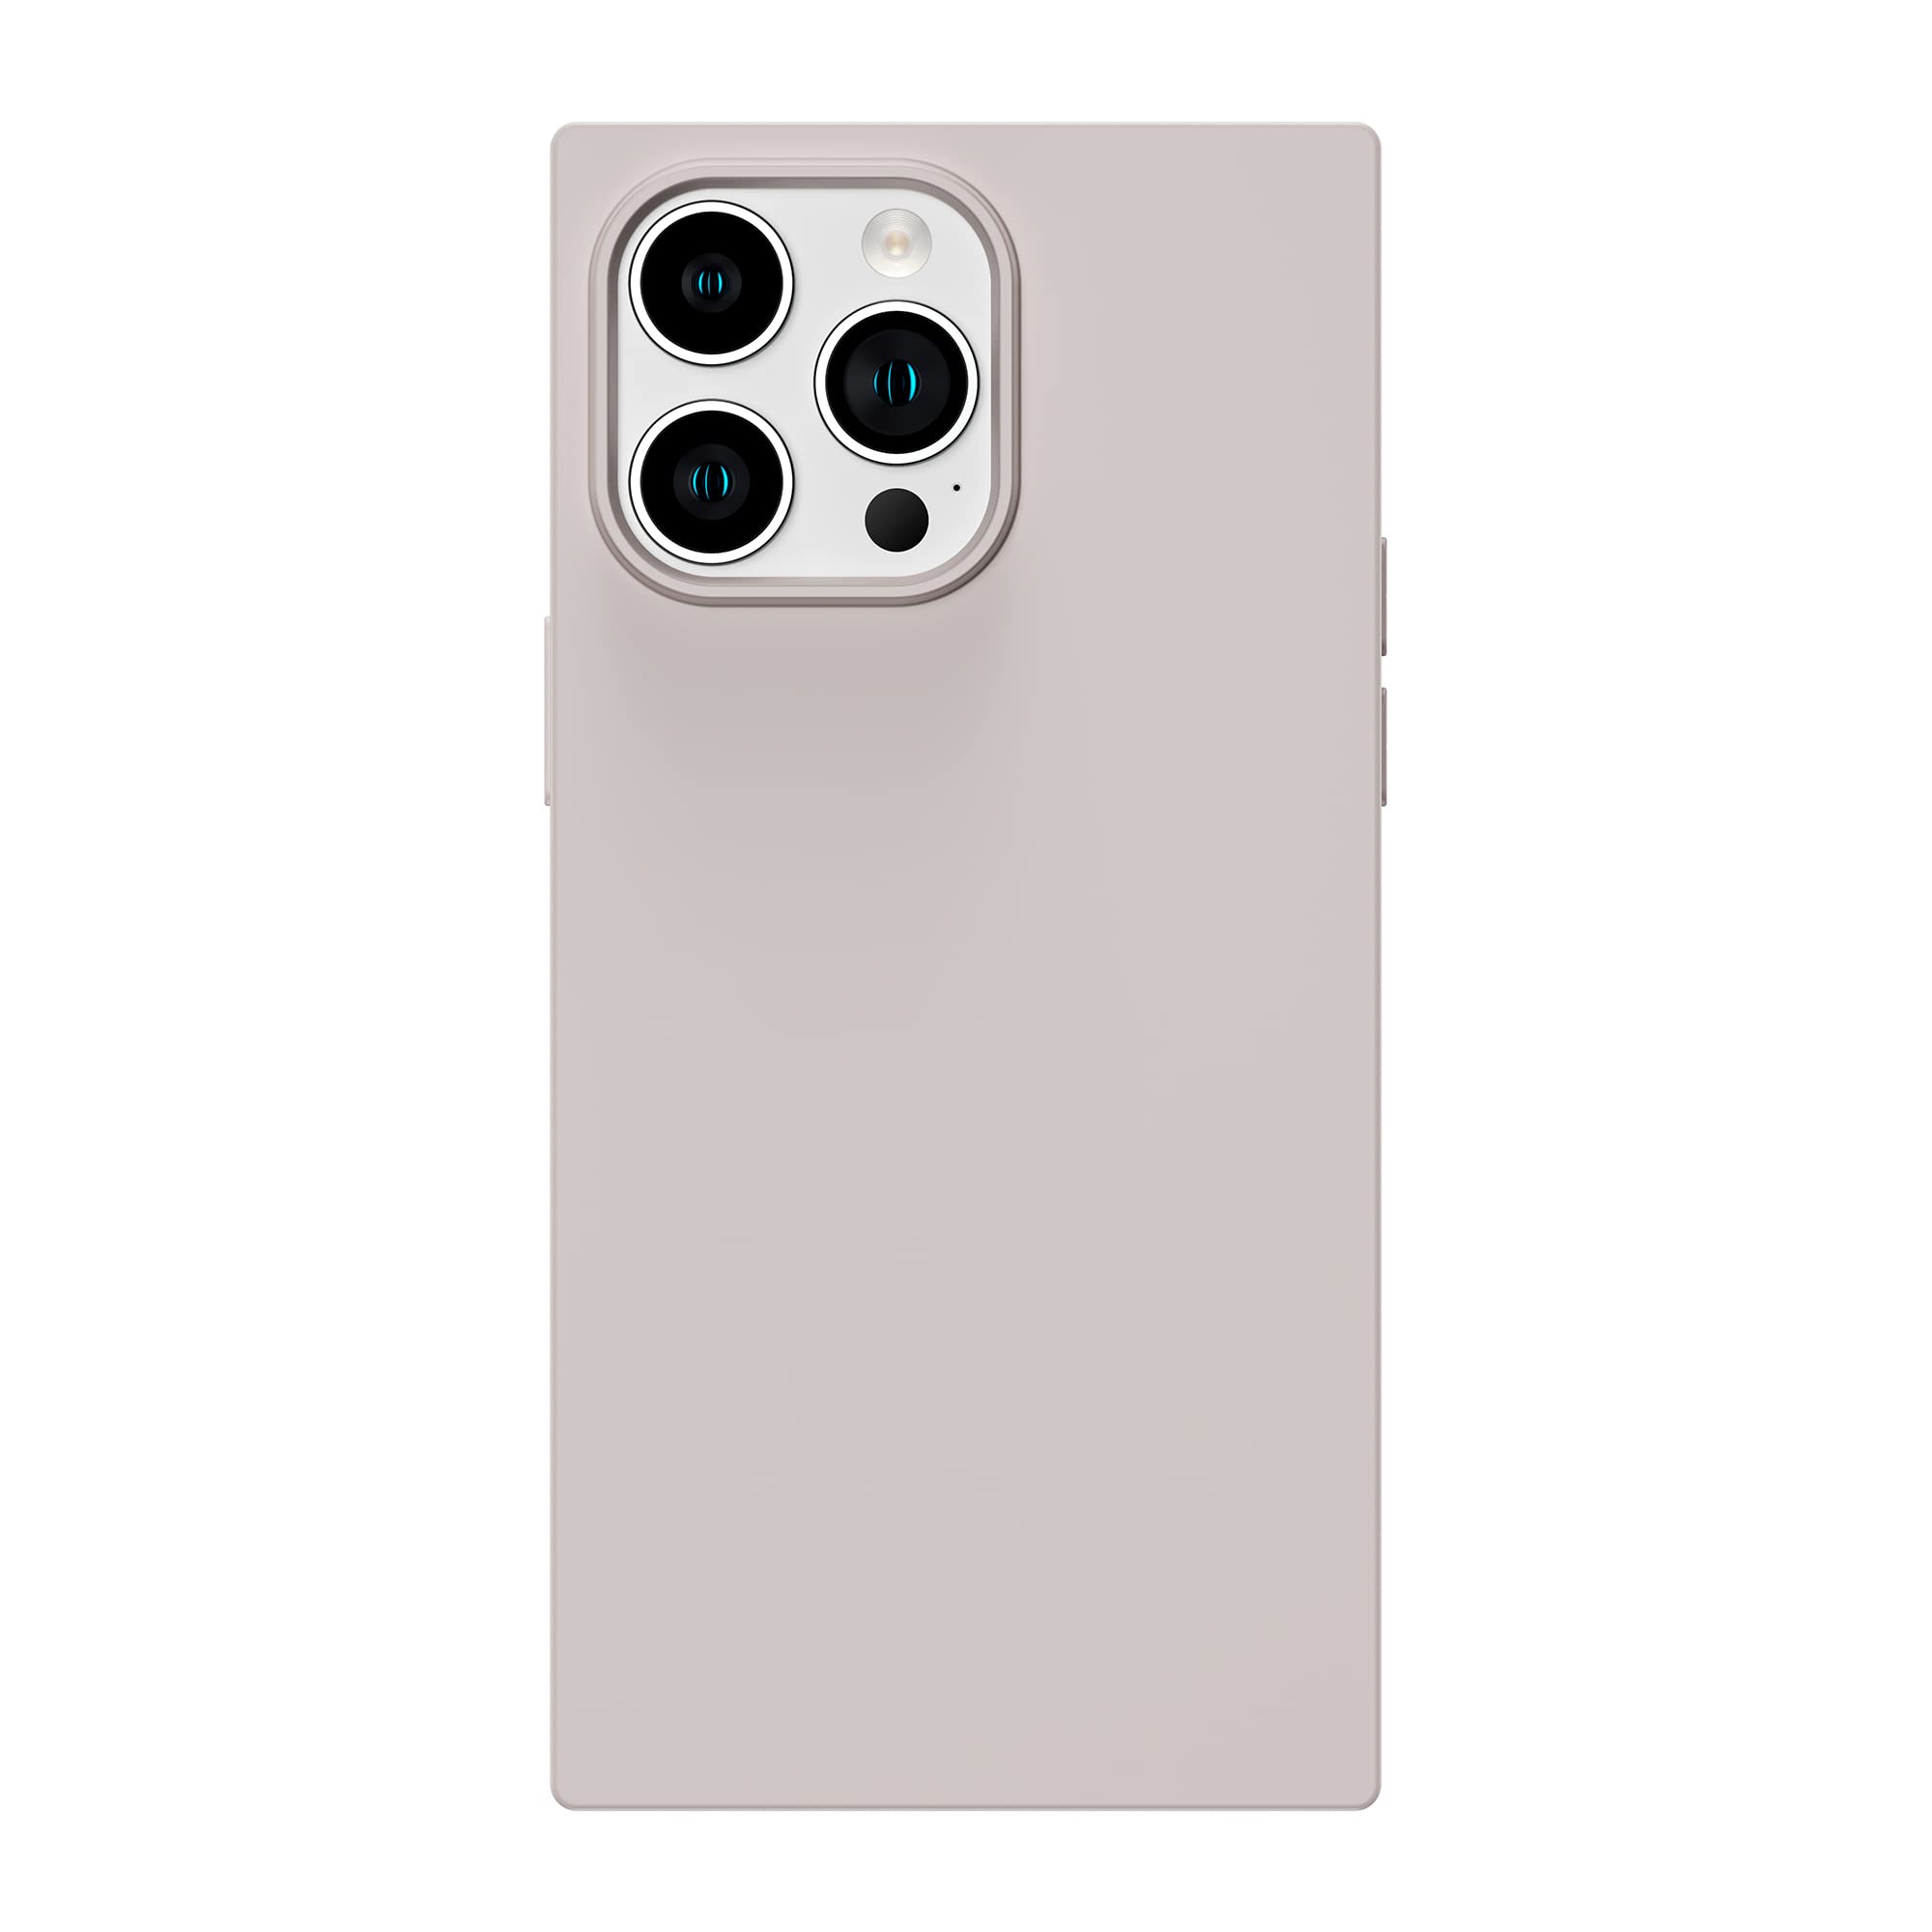 Cocomii Square iPhone 13 Pro Max Case - Slim Silicone - Lightweight & Soft Touch - Microfiber Lining - Antique White